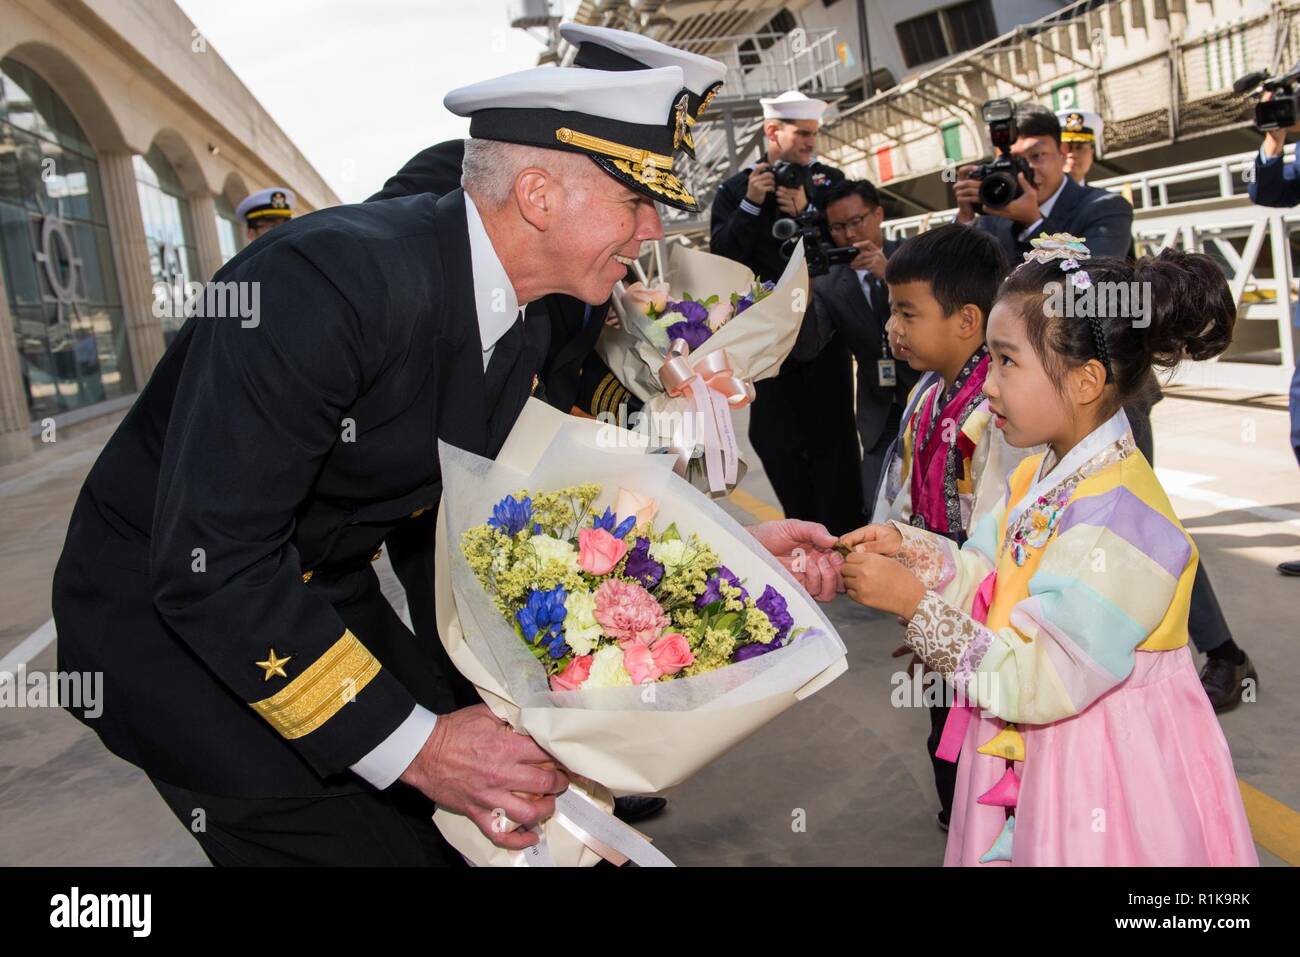 JEJU ISLAND, Republic of Korea, (Oct. 12, 2018) Rear Admiral. Karl Thomas, commander, Battle Force 7th Fleet, Task Force 70, Carrier Strike Group 5, exchanges gifts with a young girl pier side at the Republic of Korea (ROK) Navy Base in Jeju. Thomas commands the USS Ronald Reagan (CVN 76) Carrier Strike Group which is forward deployed to the U.S. 7th Fleet area of operations in support of security and stability in the Into-Pacific region. Stock Photo